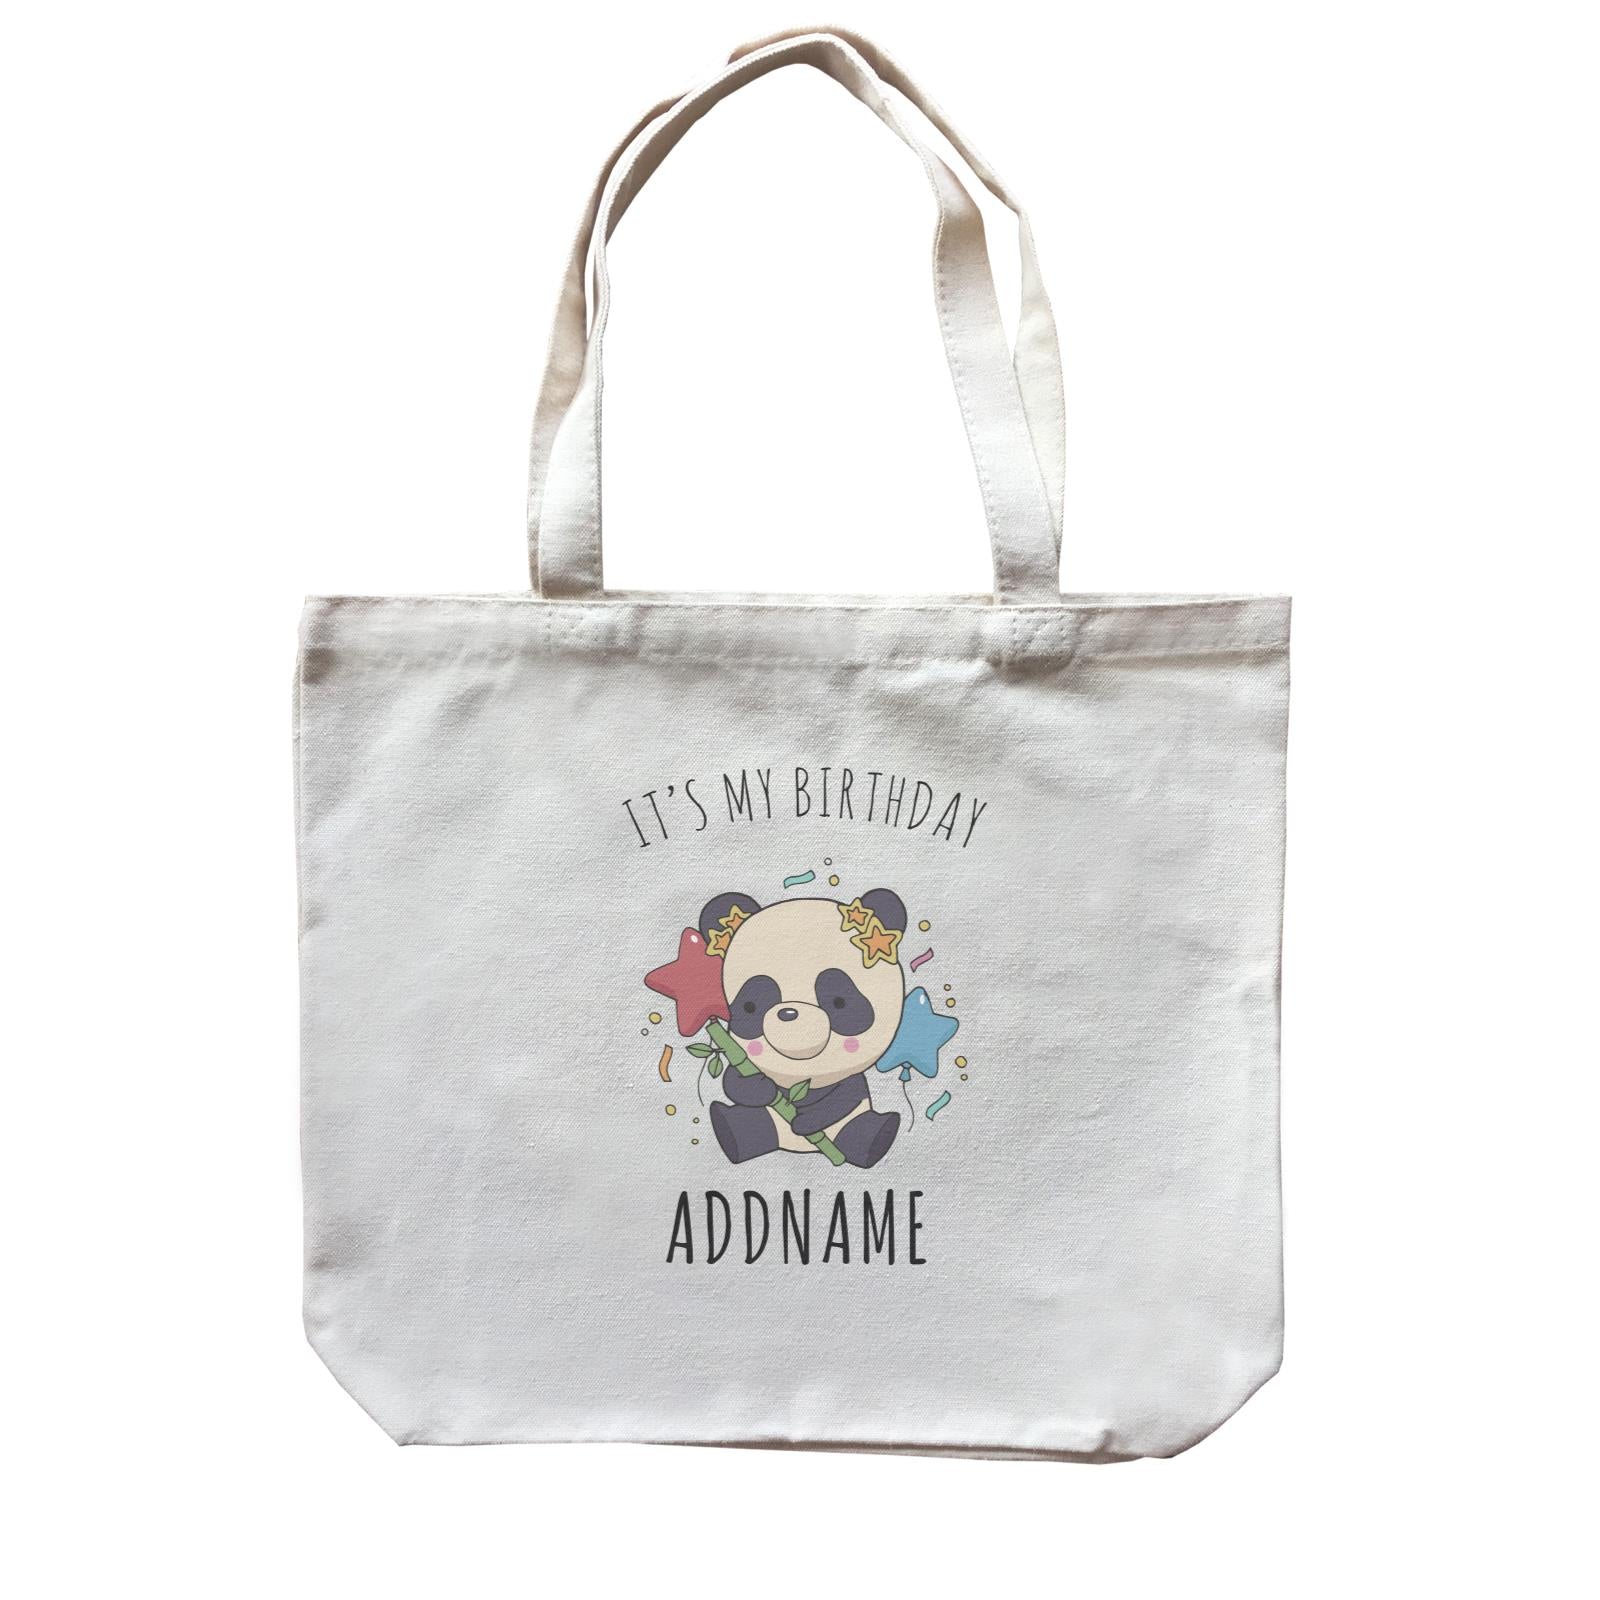 Birthday Sketch Animals Panda with Party Hat Holding Bamboo It's My Birthday Addname Canvas Bag